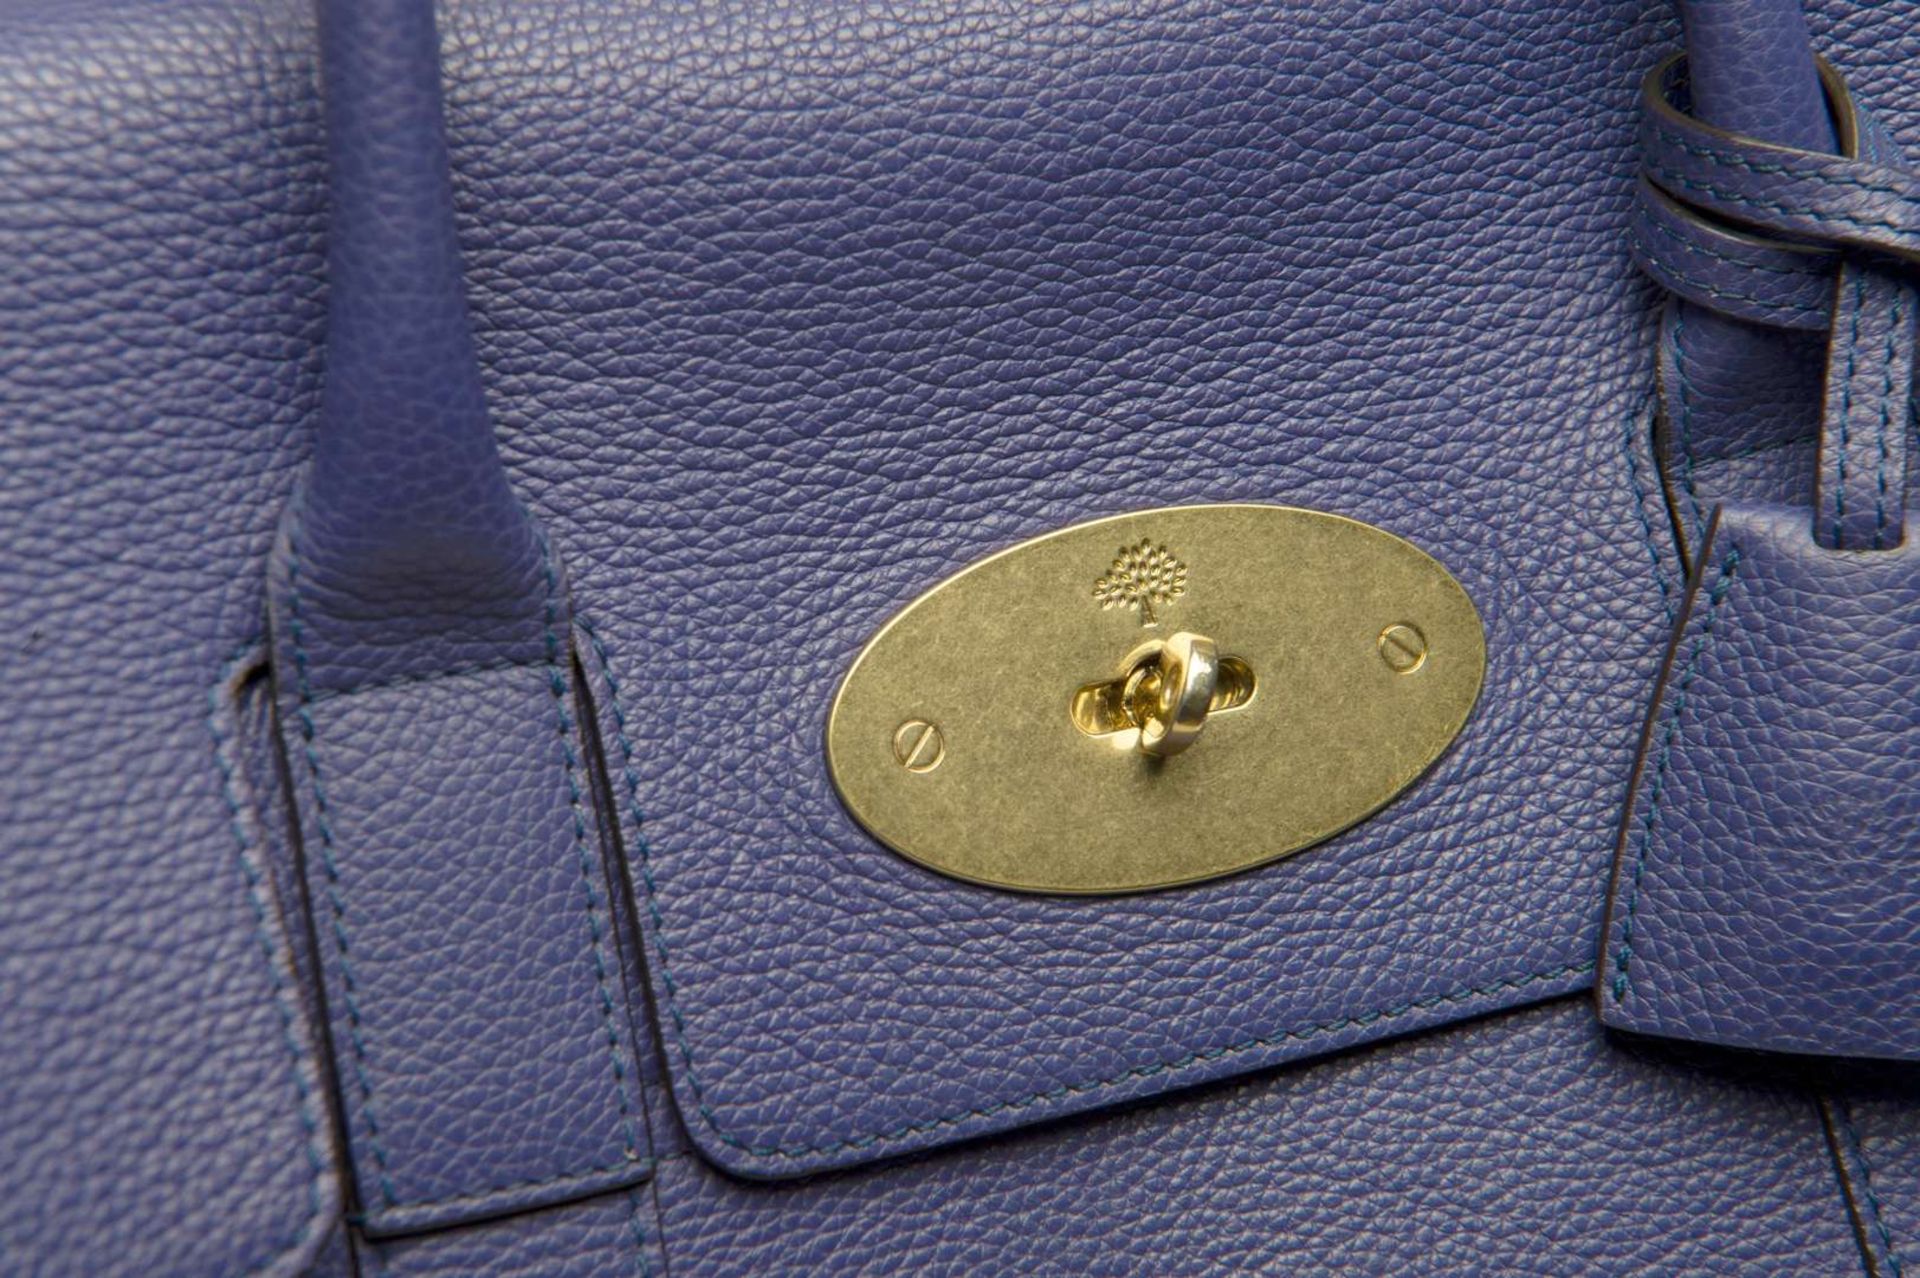 MULBERRY, a Baywaters leather handbag - Image 6 of 8